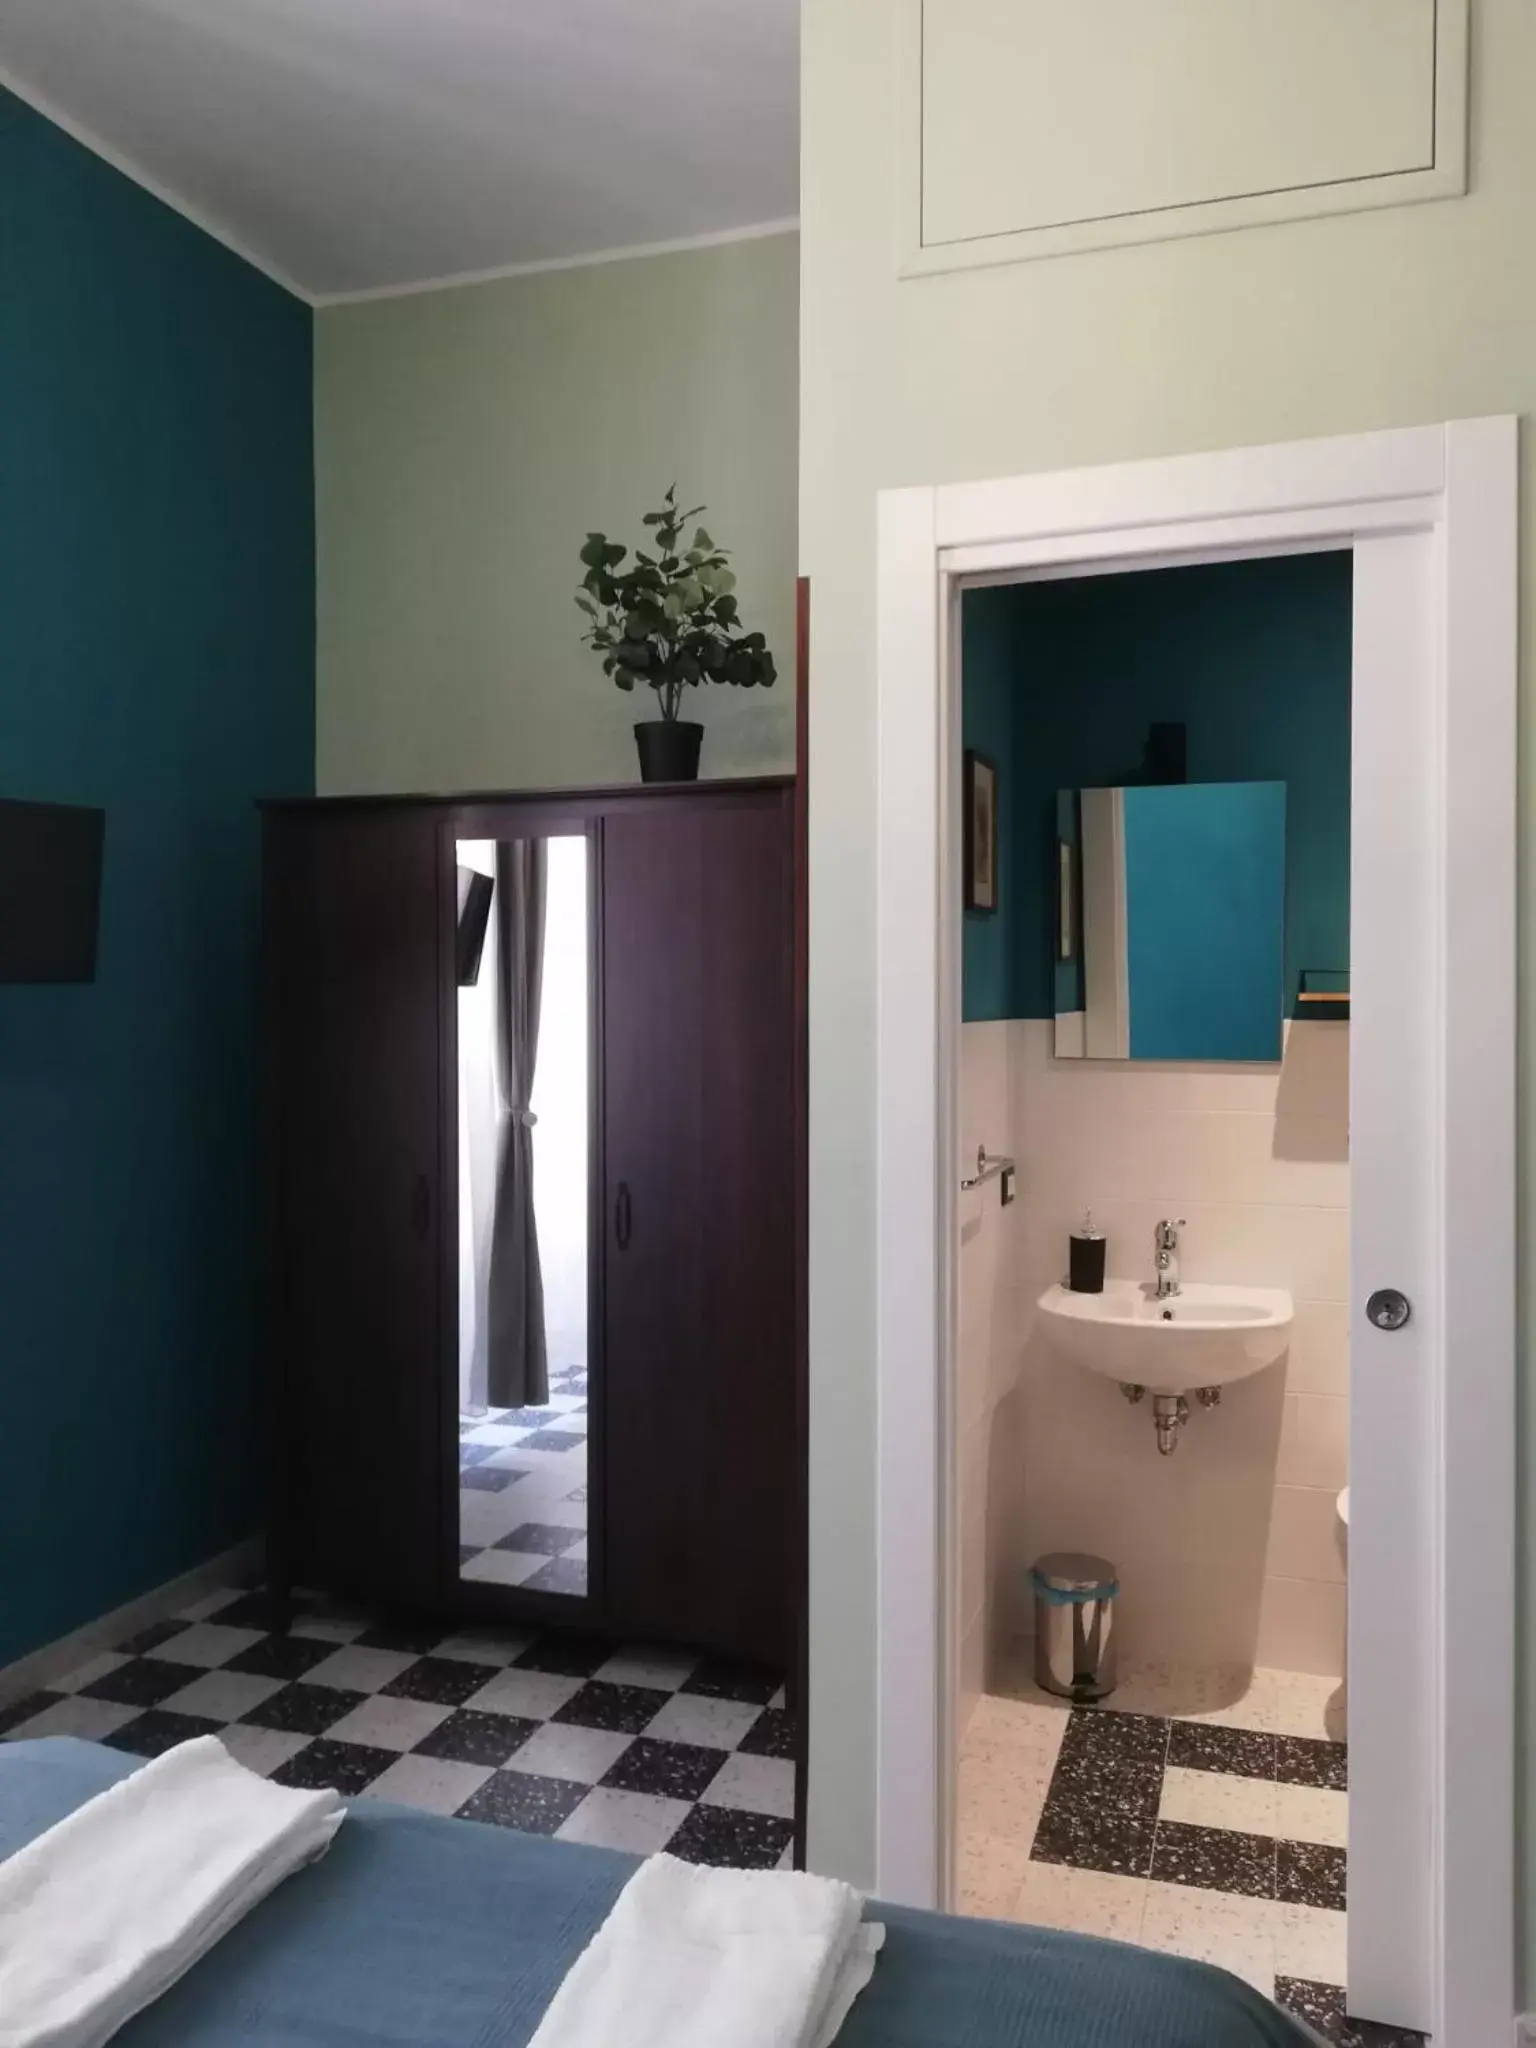 Bathroom in The Painter's House